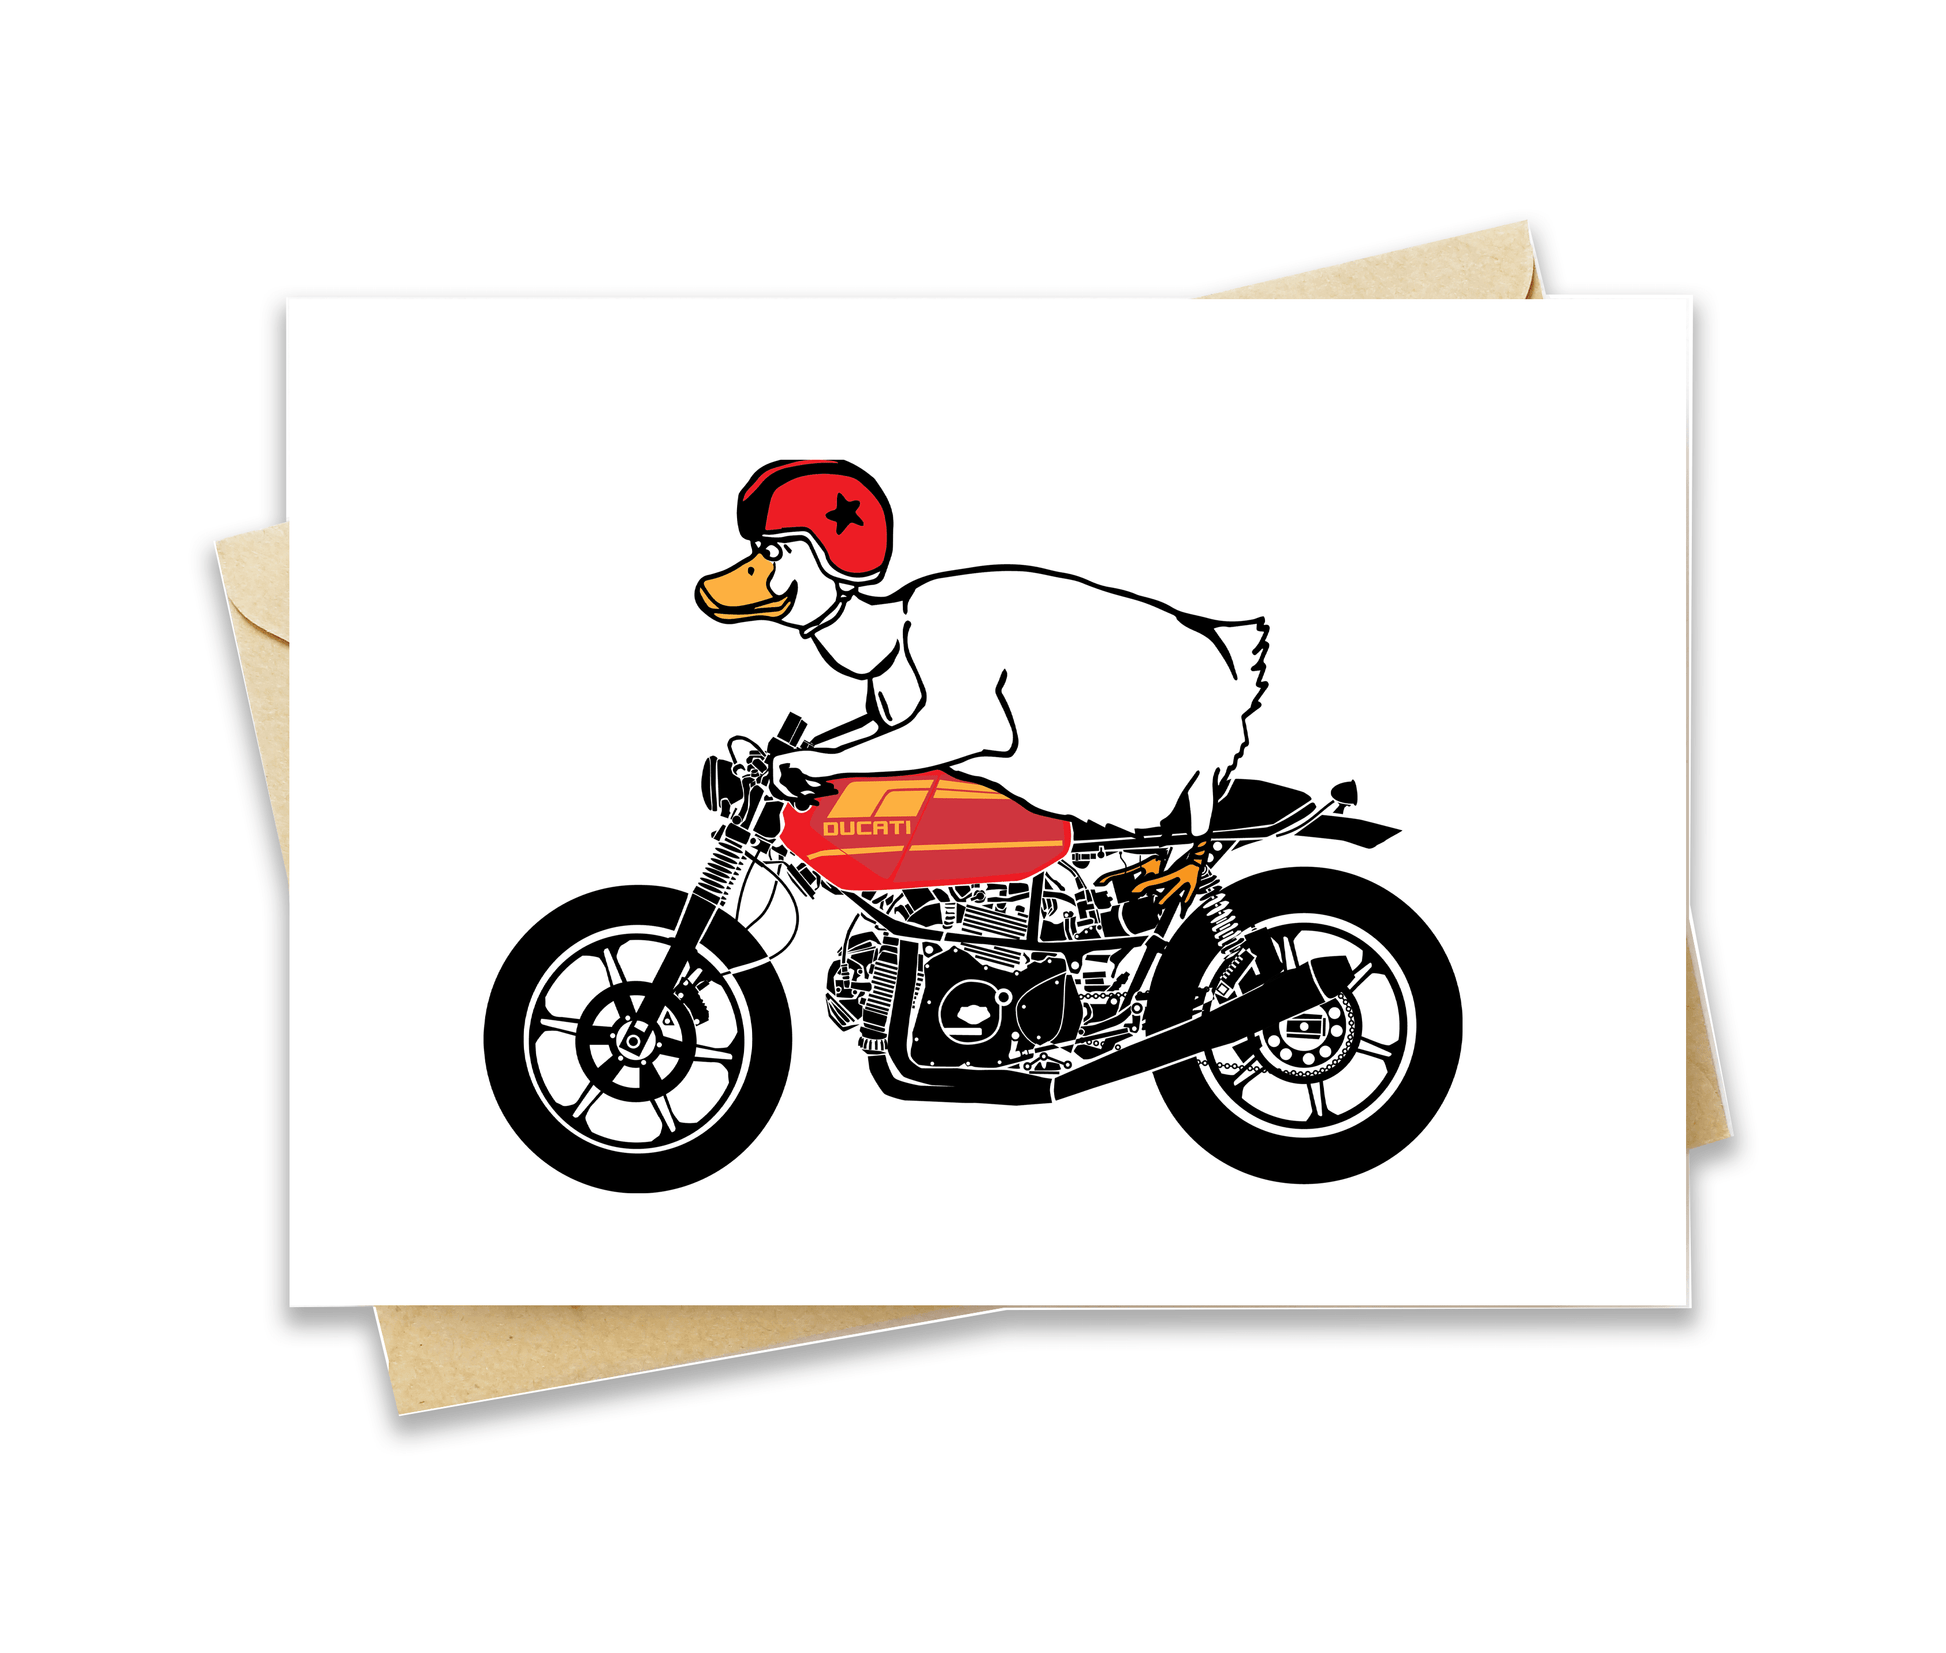 BellavanceInk: Greeting Card With A Duck On Their Ducati Cafe Racer Motorcycle 5 x 7 Inches - BellavanceInk